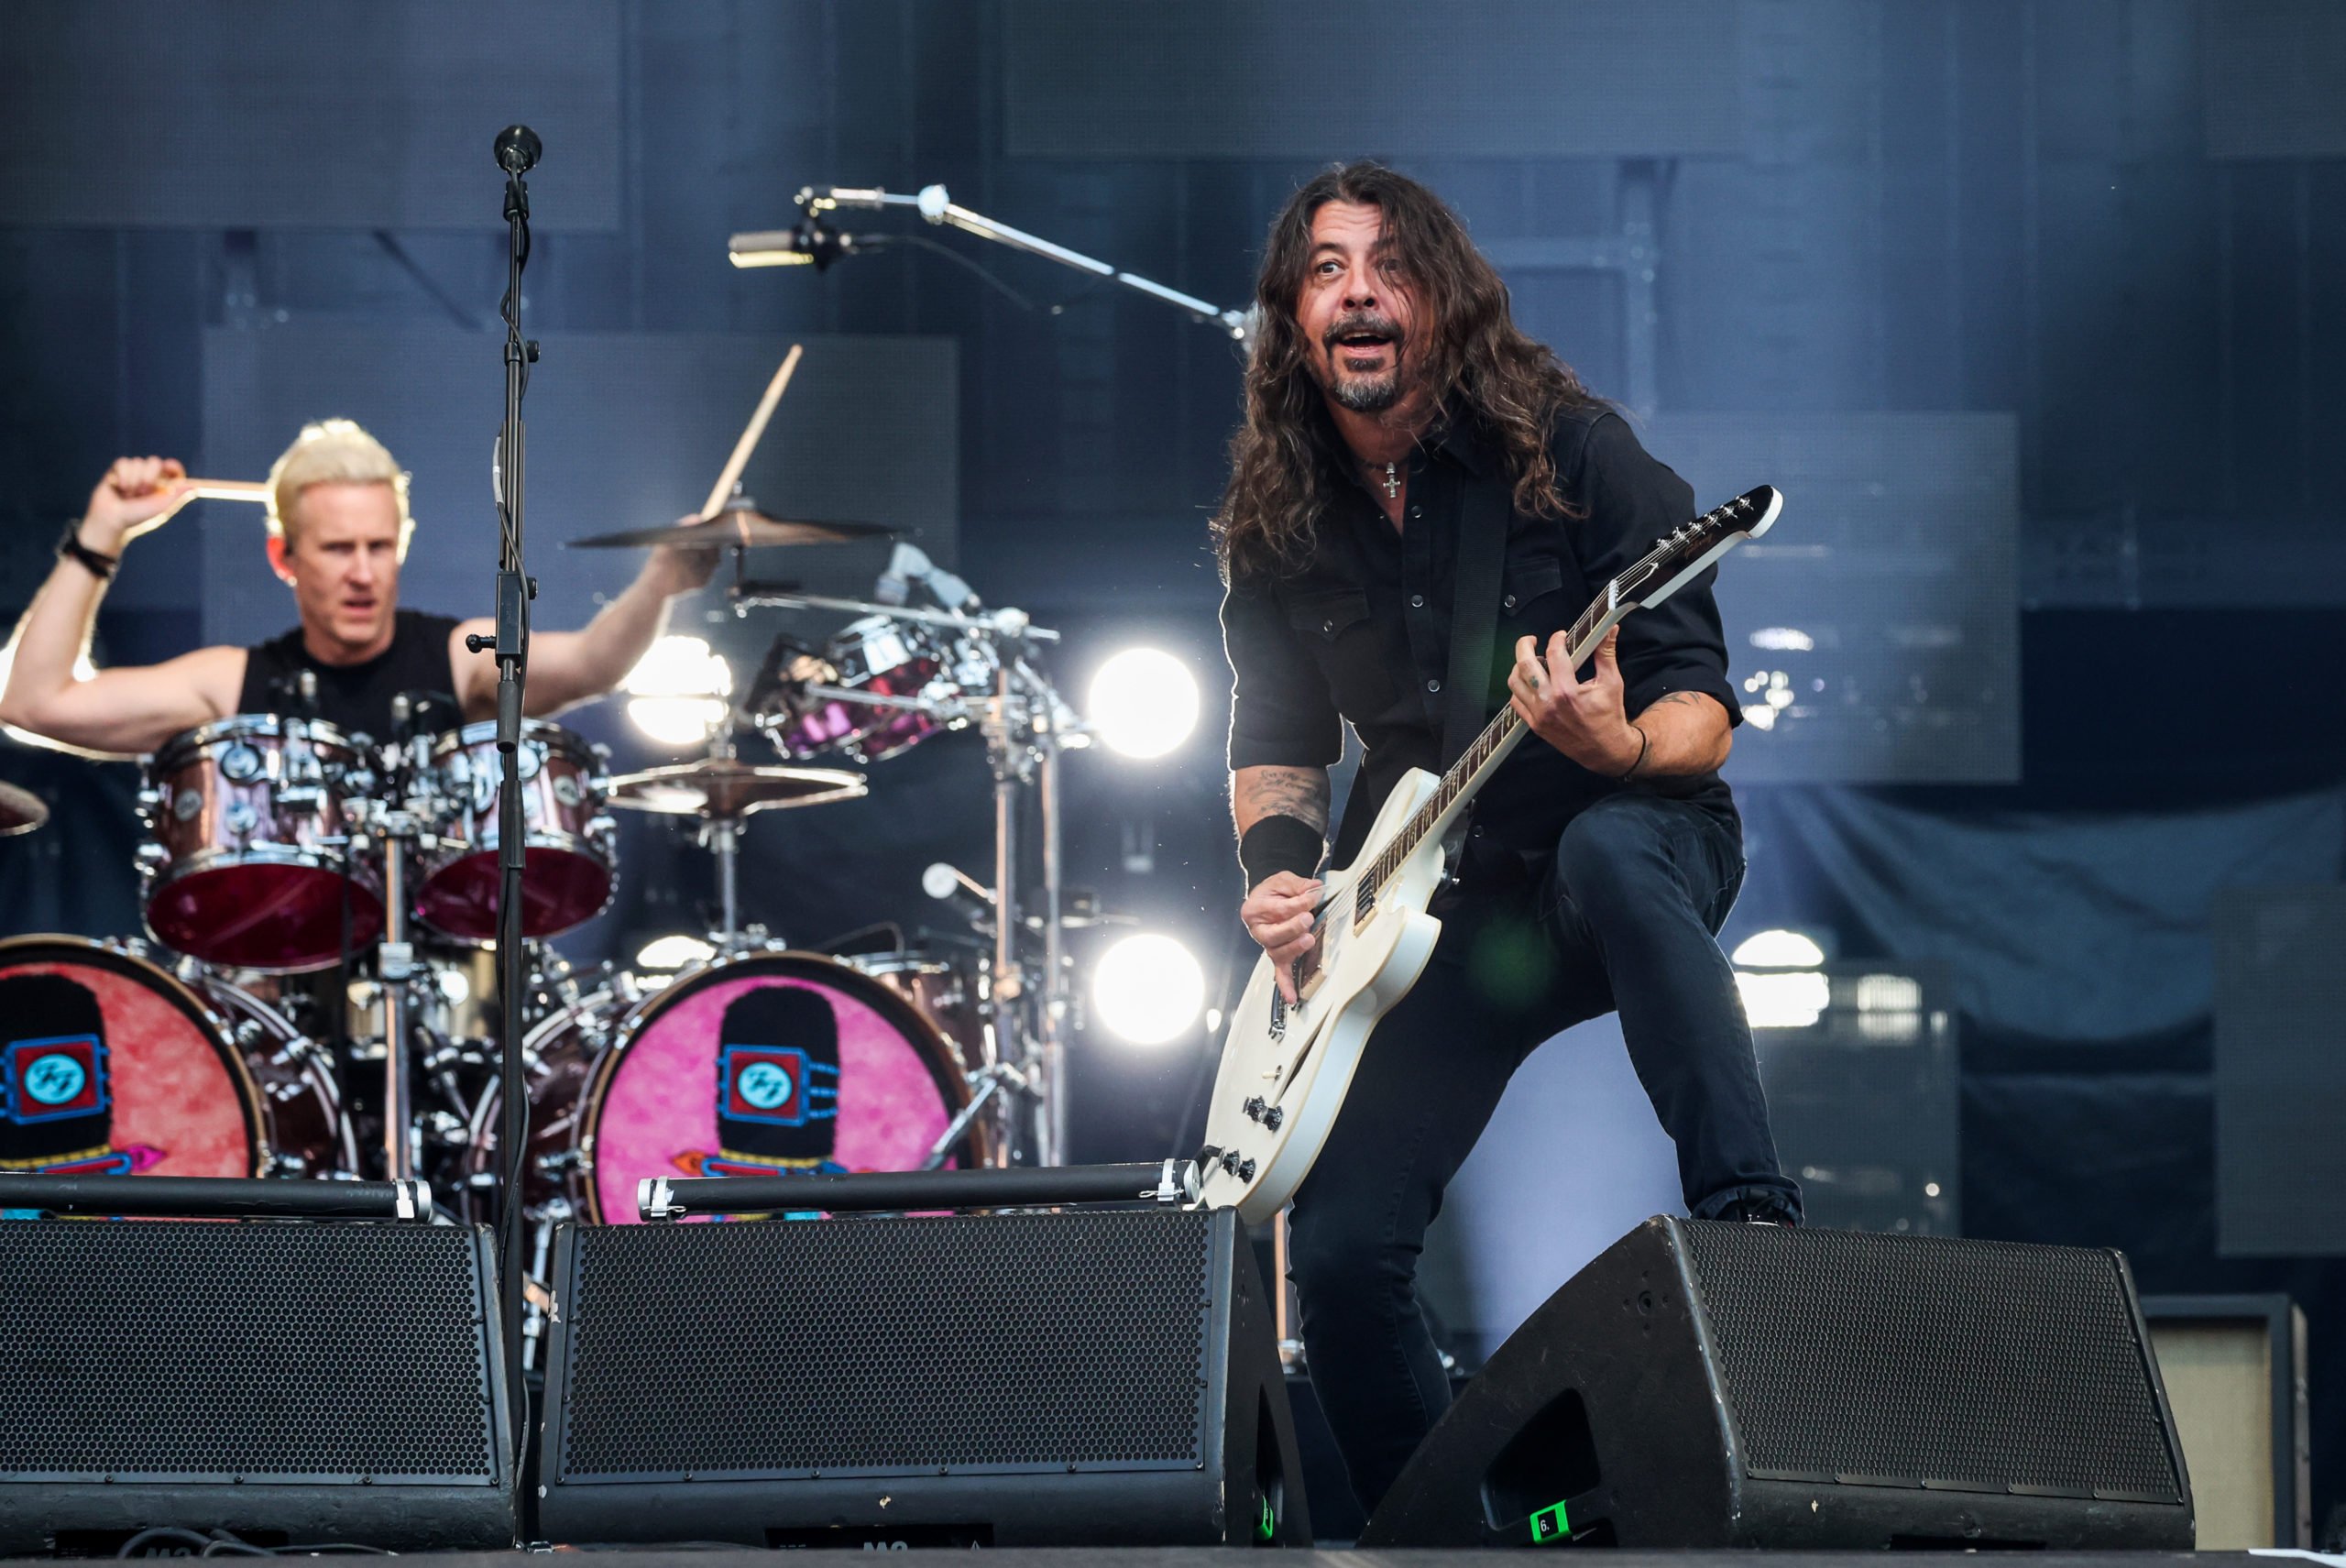 LONDON, ENGLAND - JUNE 20: Josh Freese (L) and Dave Grohl of The Foo Fighters perform on stage at London Stadium on June 20, 2024 in London, England. (Photo by Kevin Mazur/Getty Images for Foo Fighters)